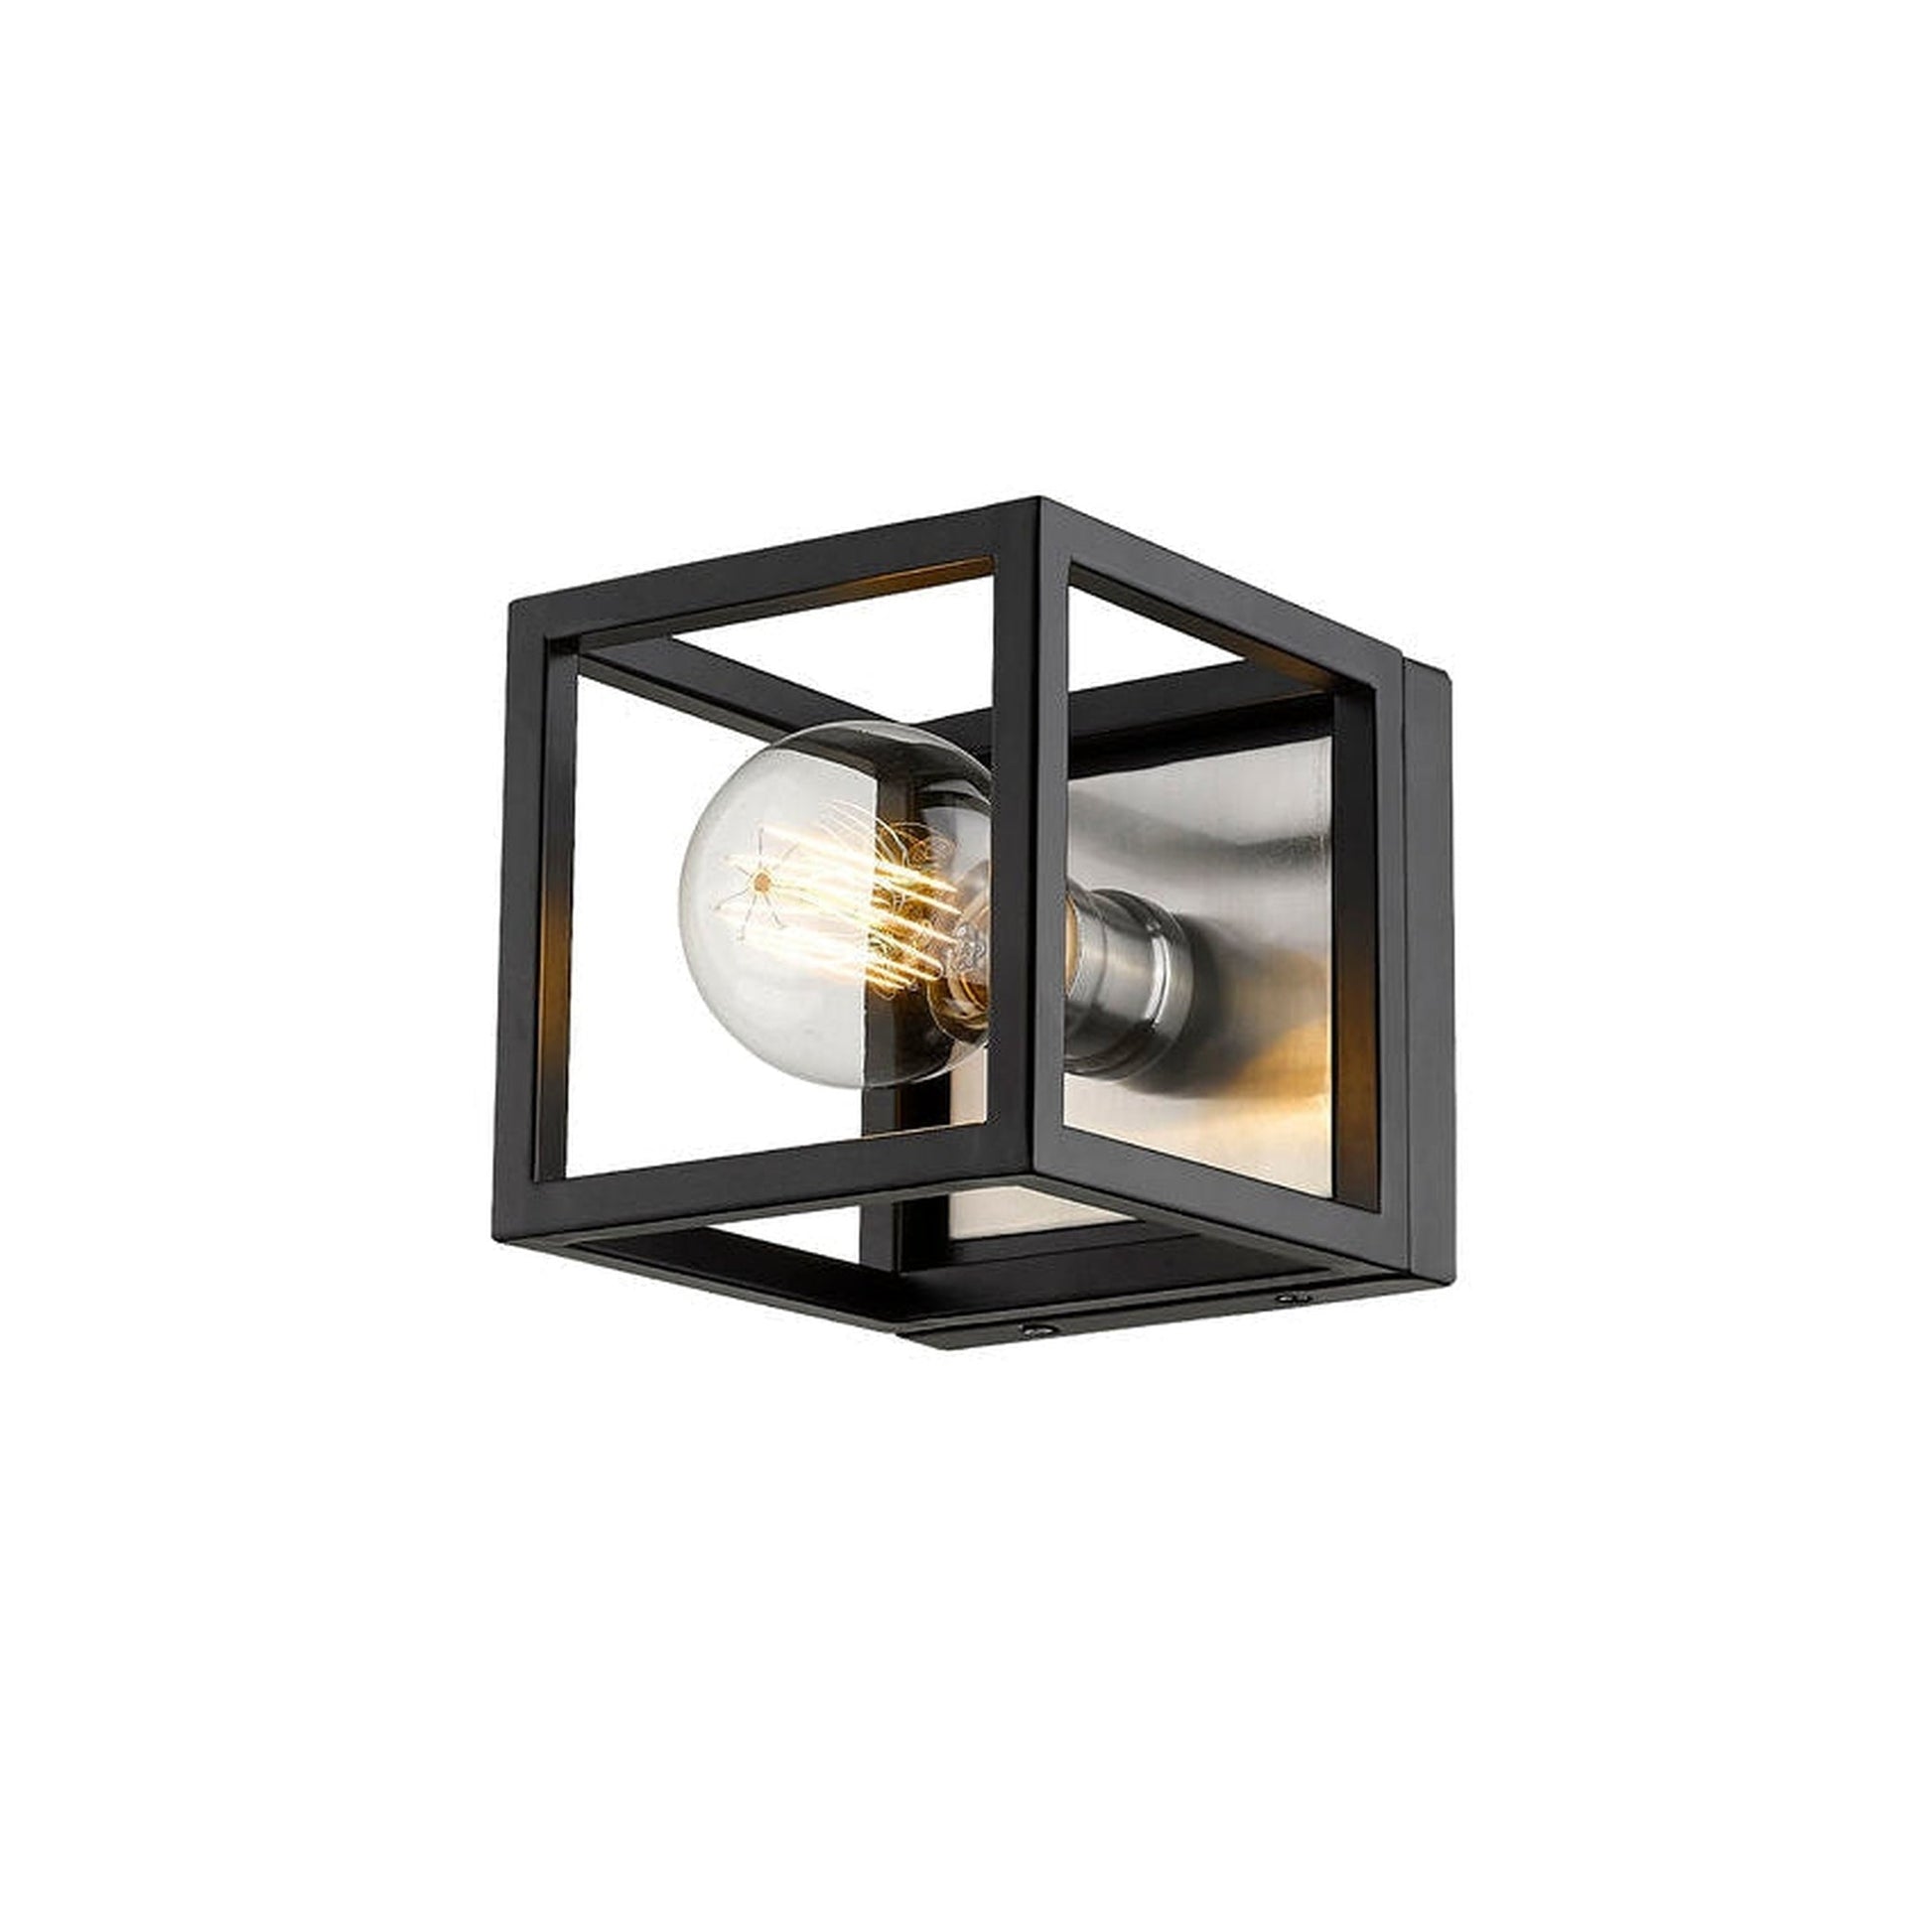 Z-Lite Kube 6" 1-Light Matte Black and Brushed Nickel Wall Sconce